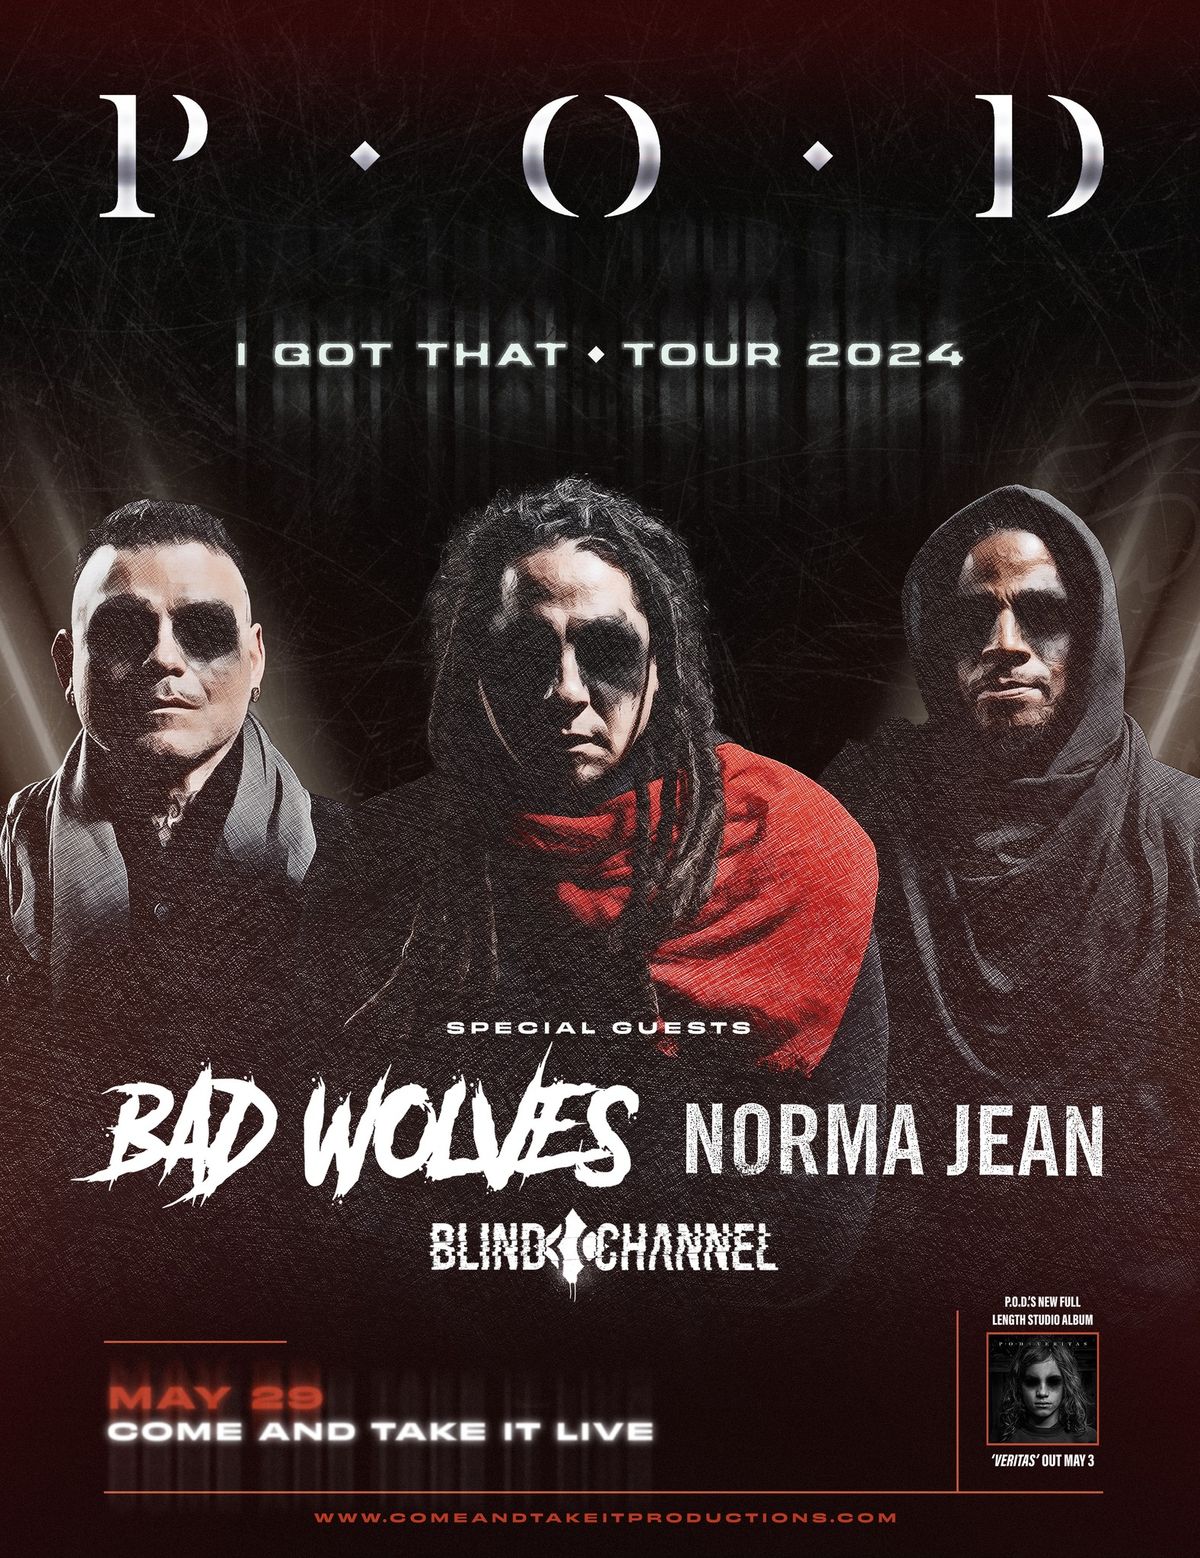 P.O.D. - I Got That Tour with Bad Wolves, Norma Jean, and MORE at Come and Take It Live!